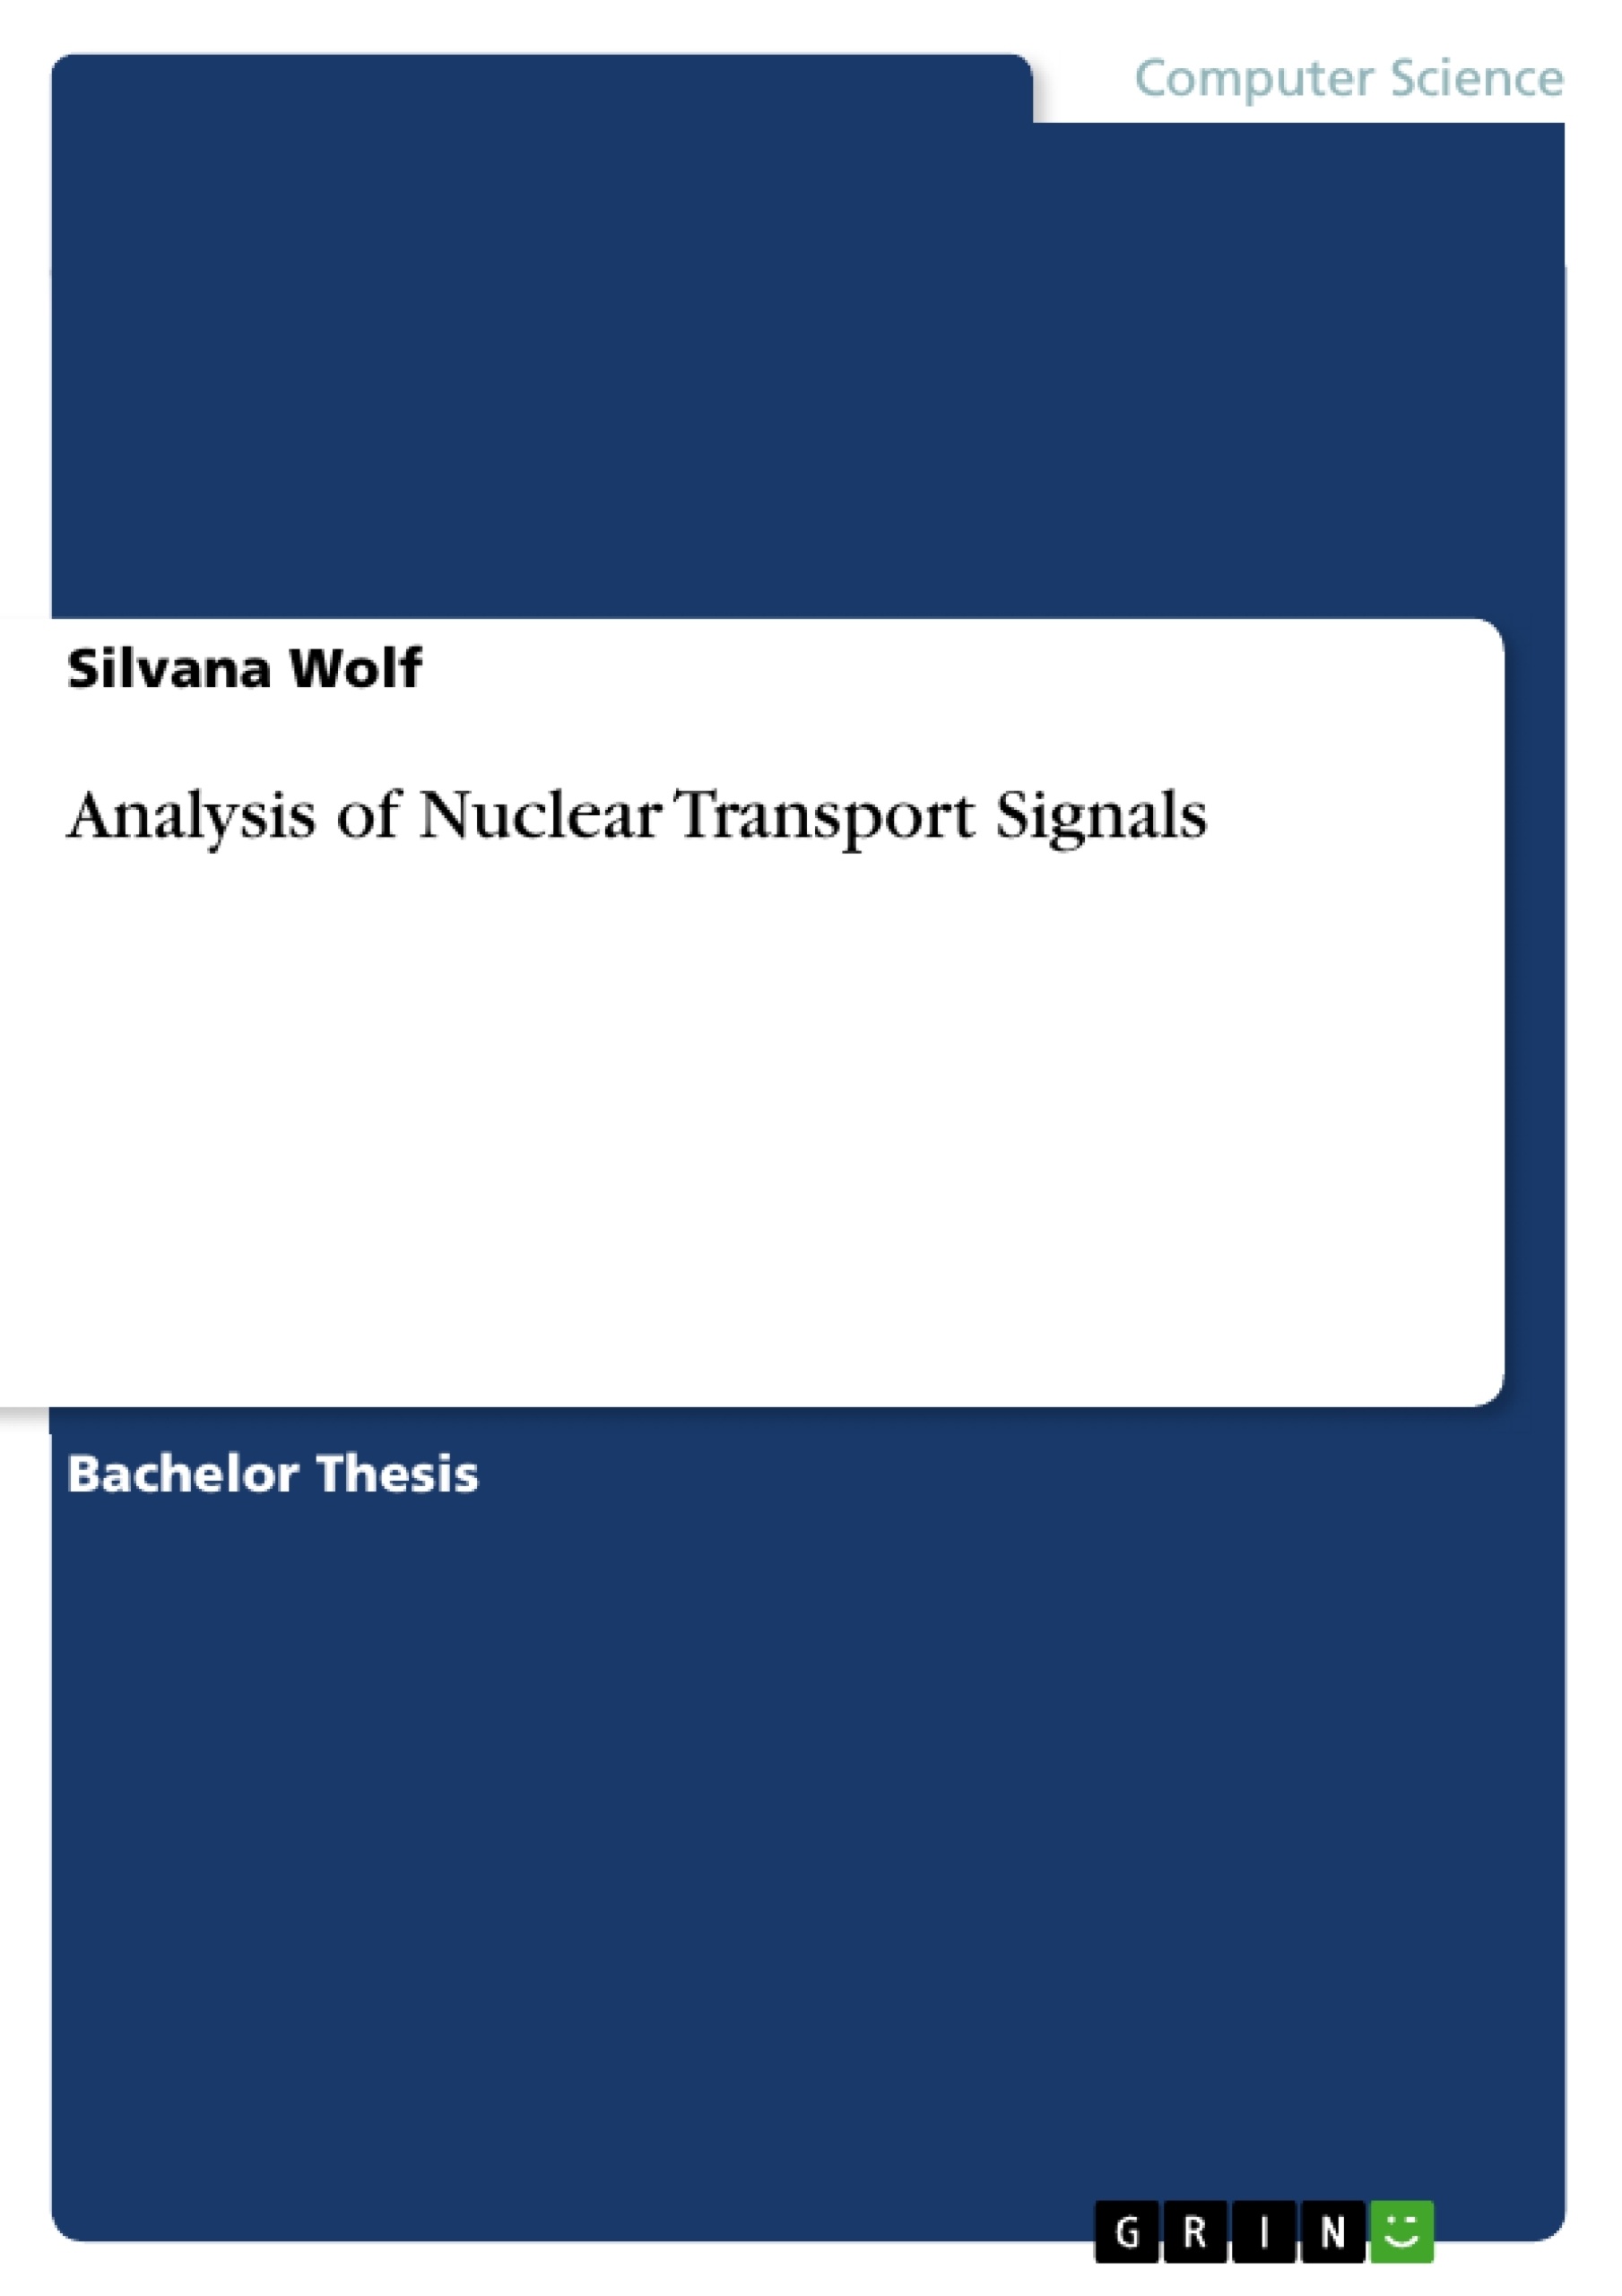 Title: Analysis of Nuclear Transport Signals